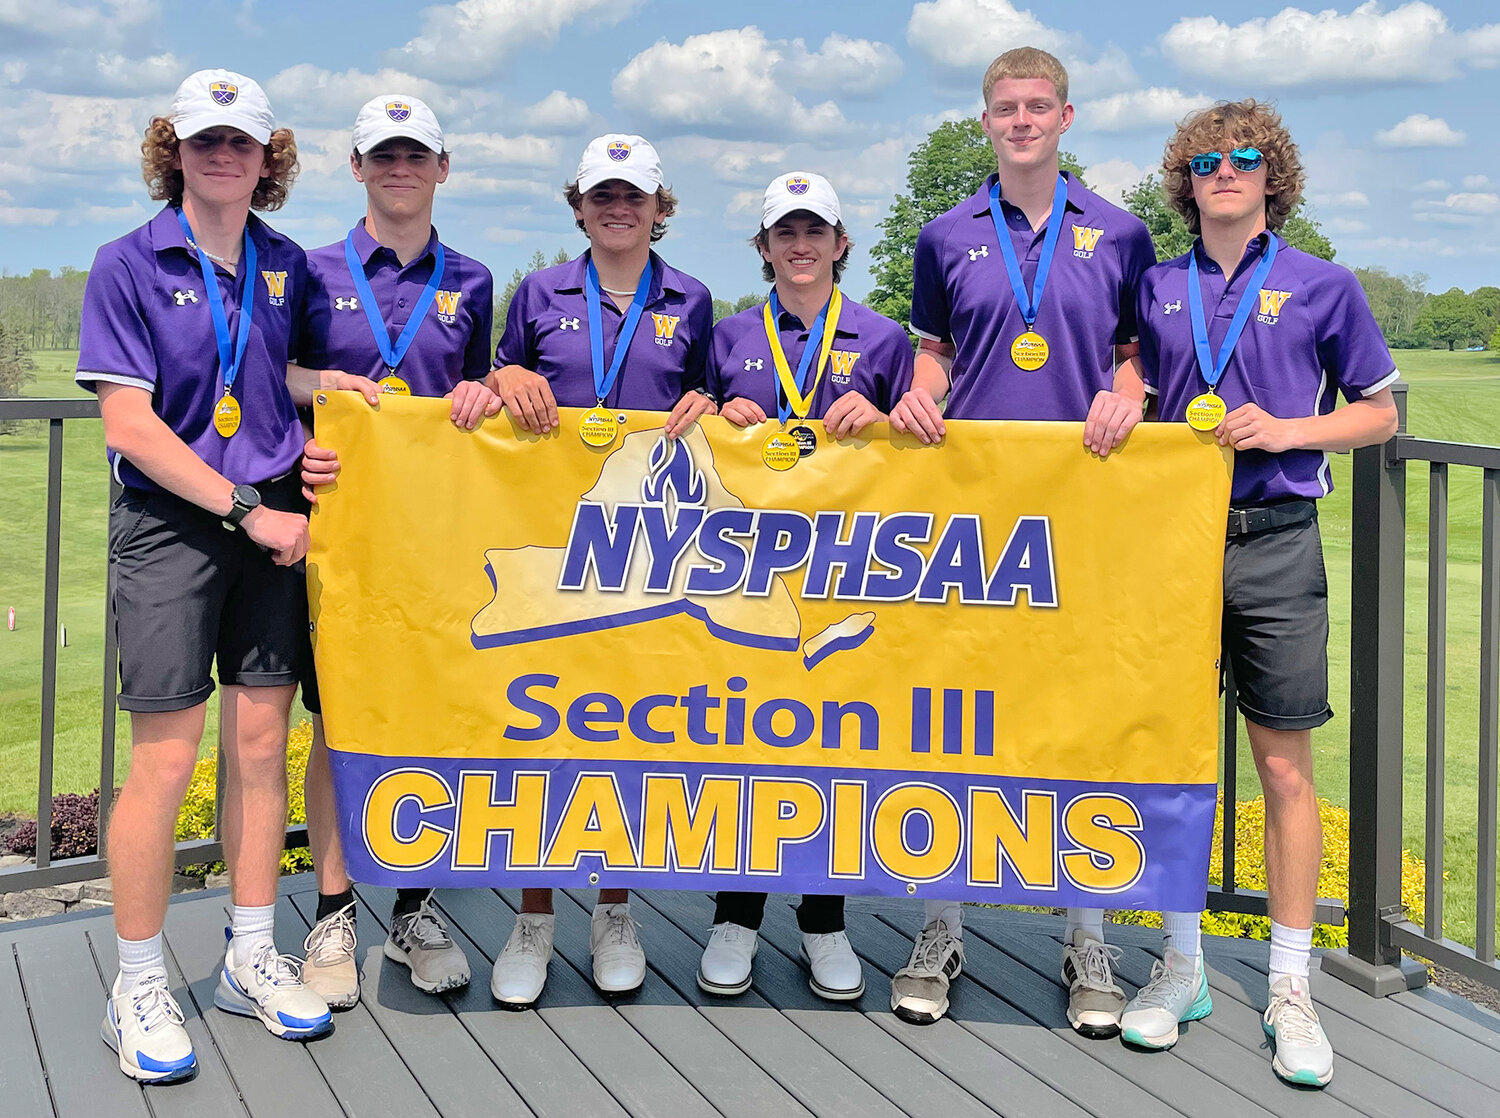 Waterville boys golf won its third straight Section III East small schools title. The golfers are, from left: Gavin Poyer, Connor Stanton, Jackson Ruane, Login Baker, Joseph Hinman and Garnet Acker. Poyer placed third with a 78 to take the small school medalist honors. Stanton and Ruane joined him in qualifying for Section III state qualifier at 7 Oaks Golf Club this week.